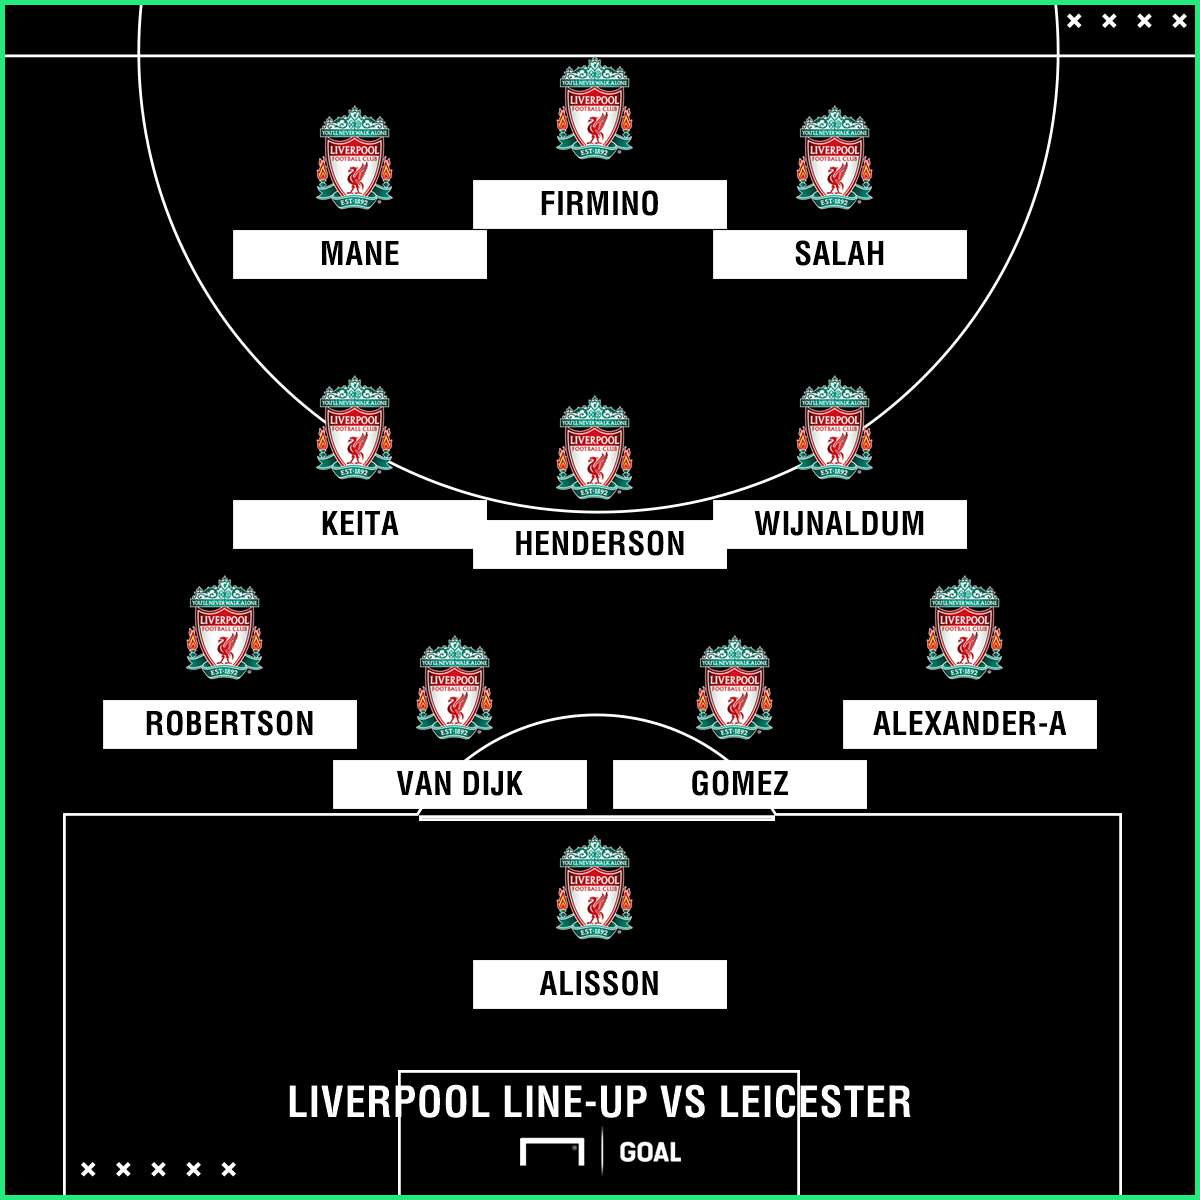 Likely Liverpool team vs Leicester